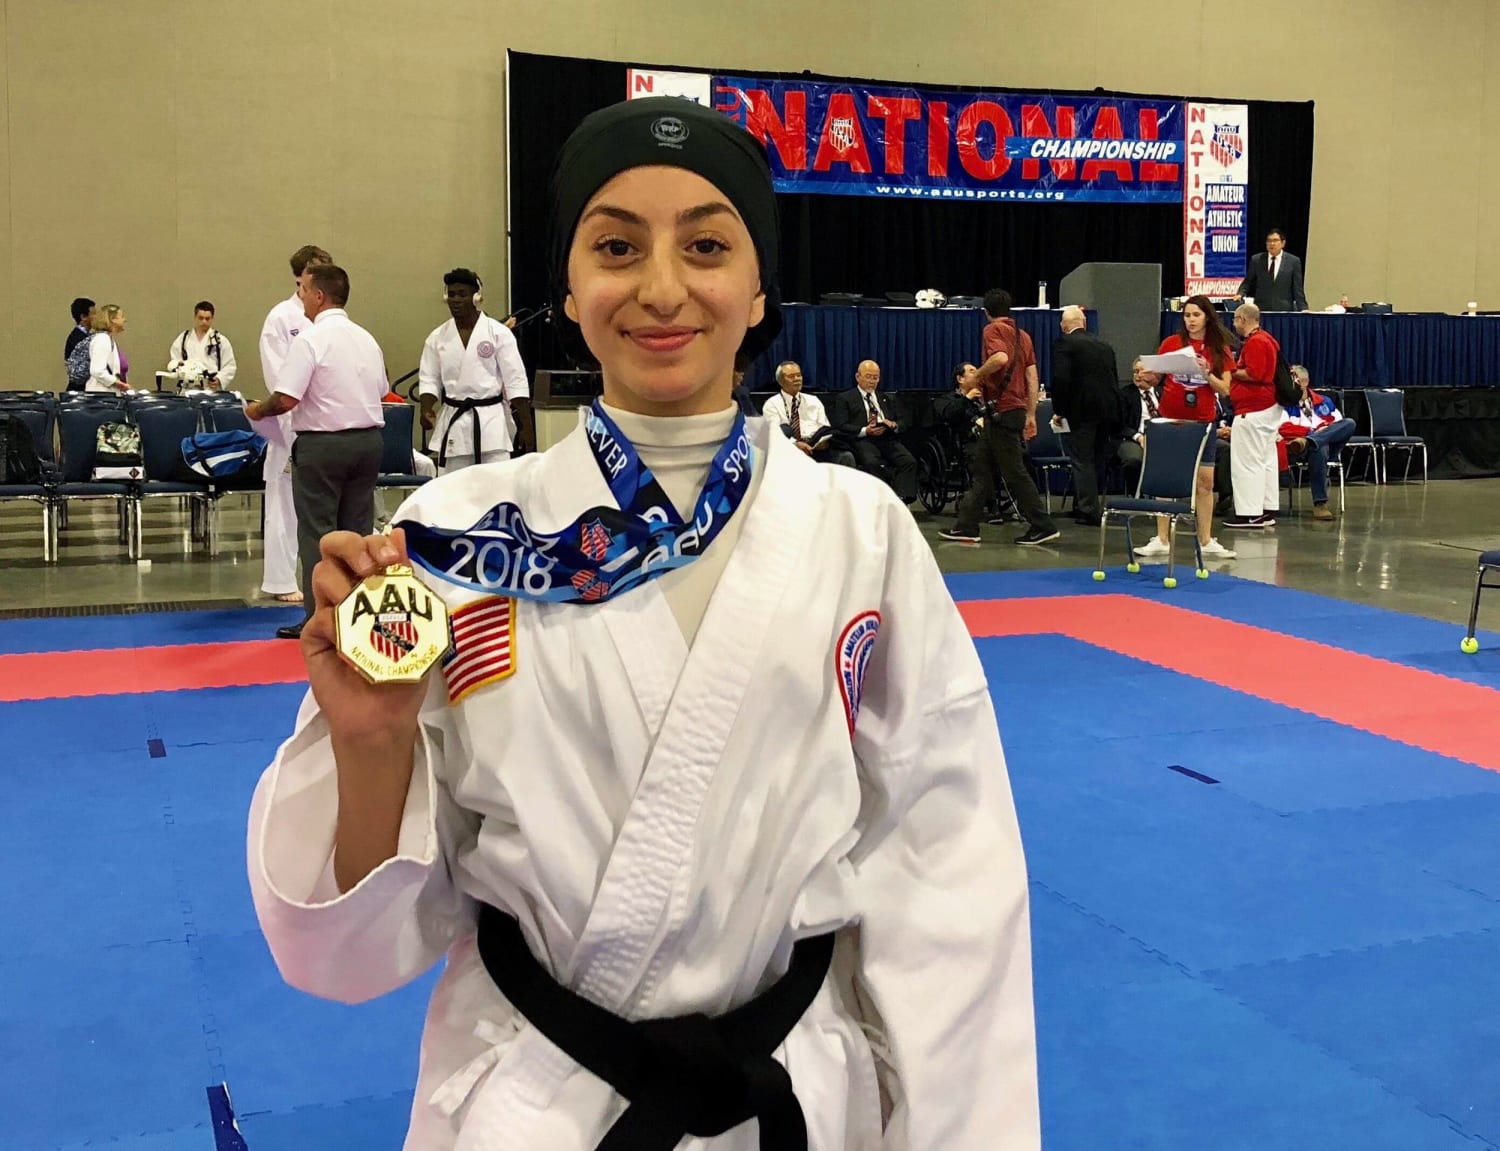 Breaking bias barriers 17-year old karate champion competes in a hijab picture